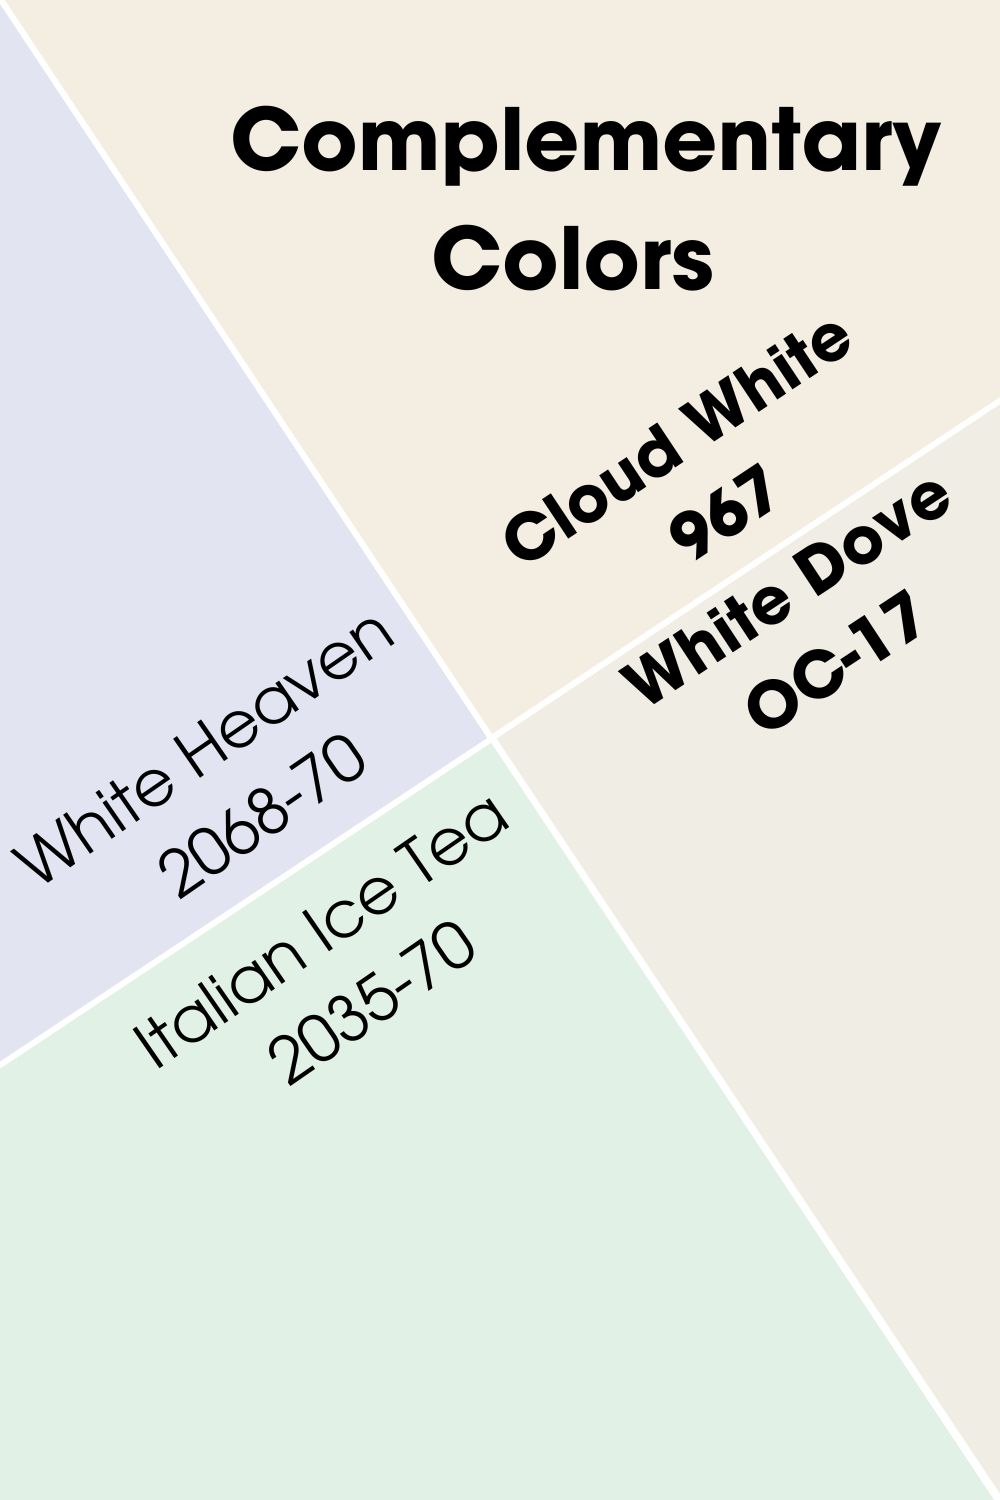 Cloud White vs. White Dove Complementary Colors